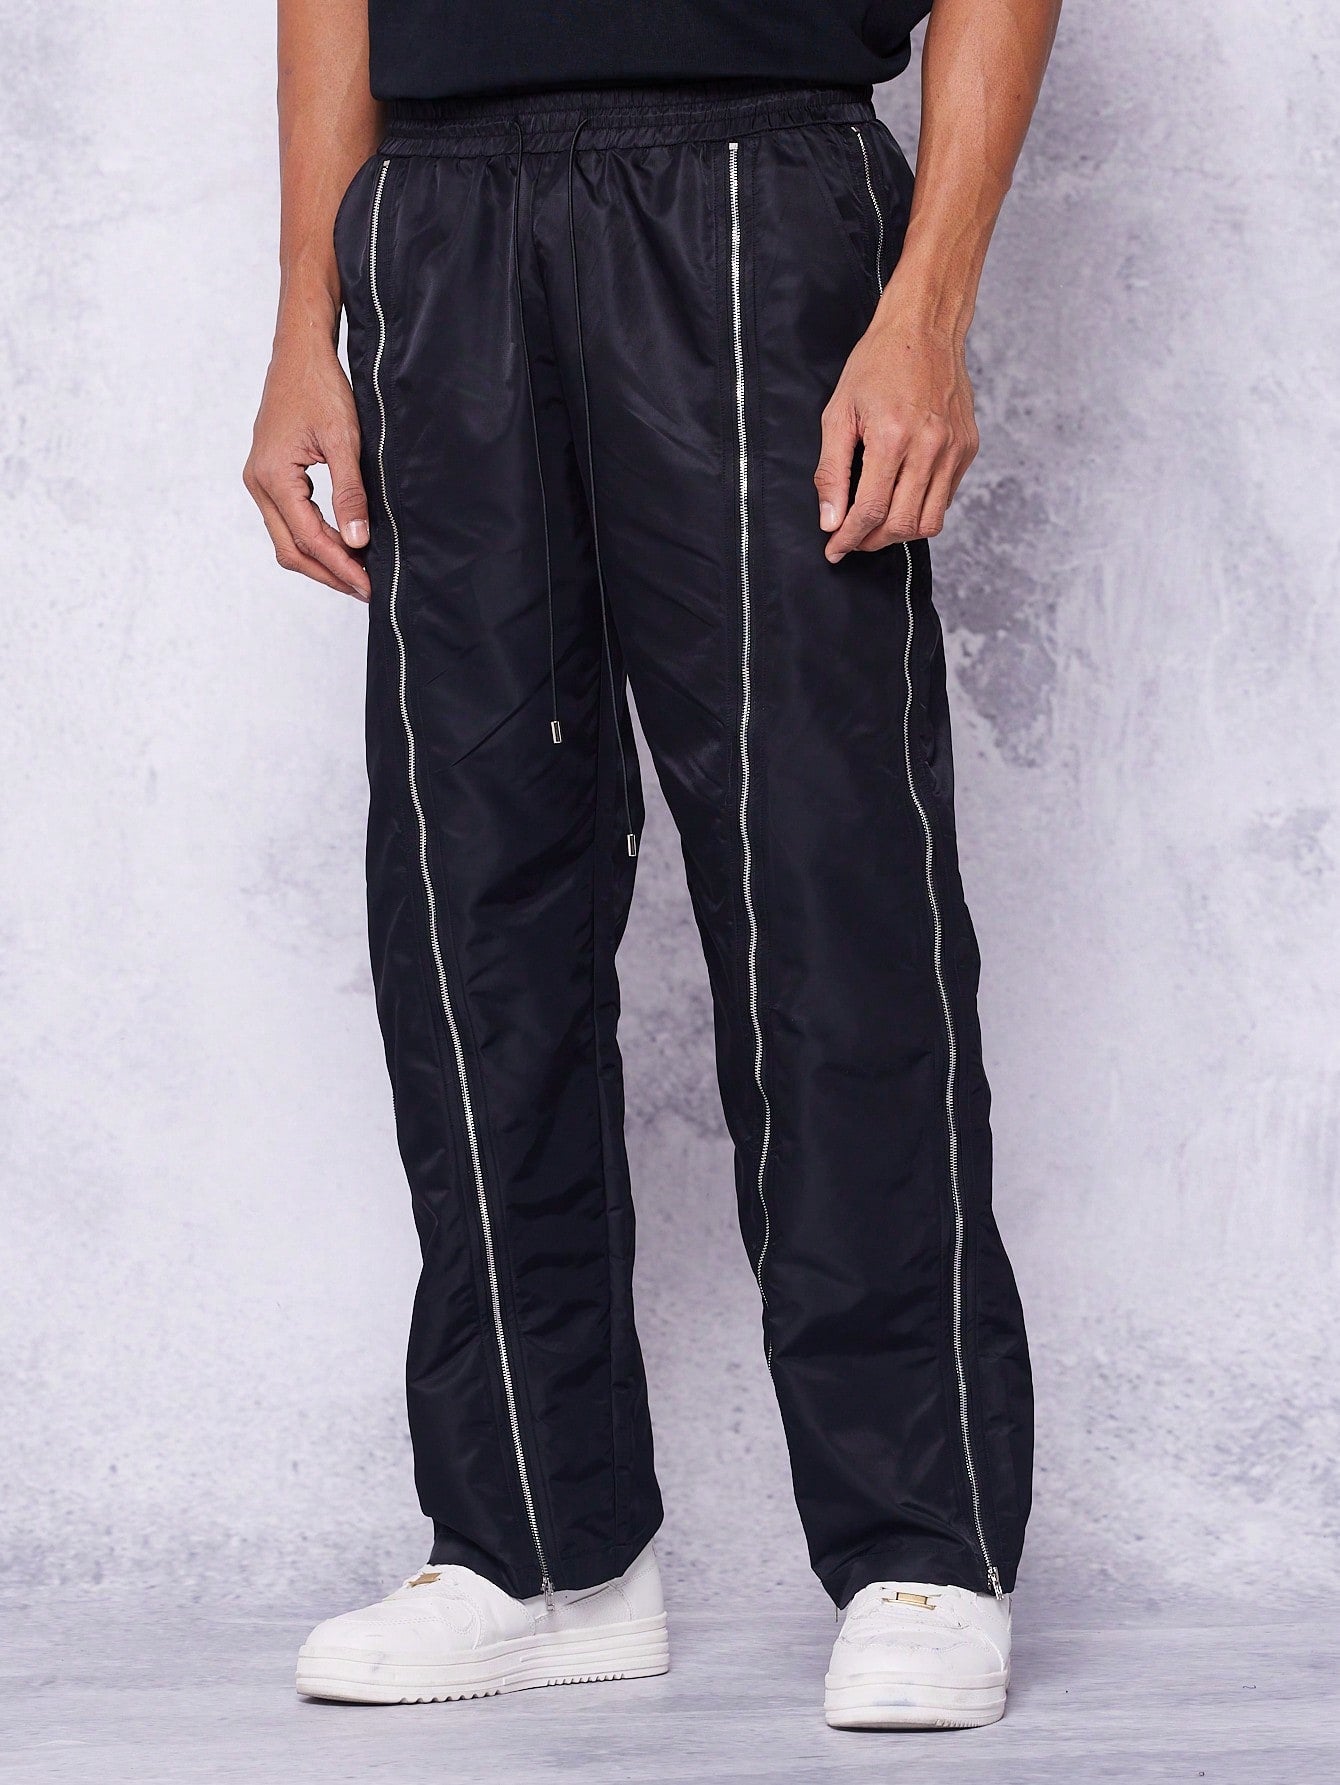 Straight Leg Trouser With Zip Detail College Ready